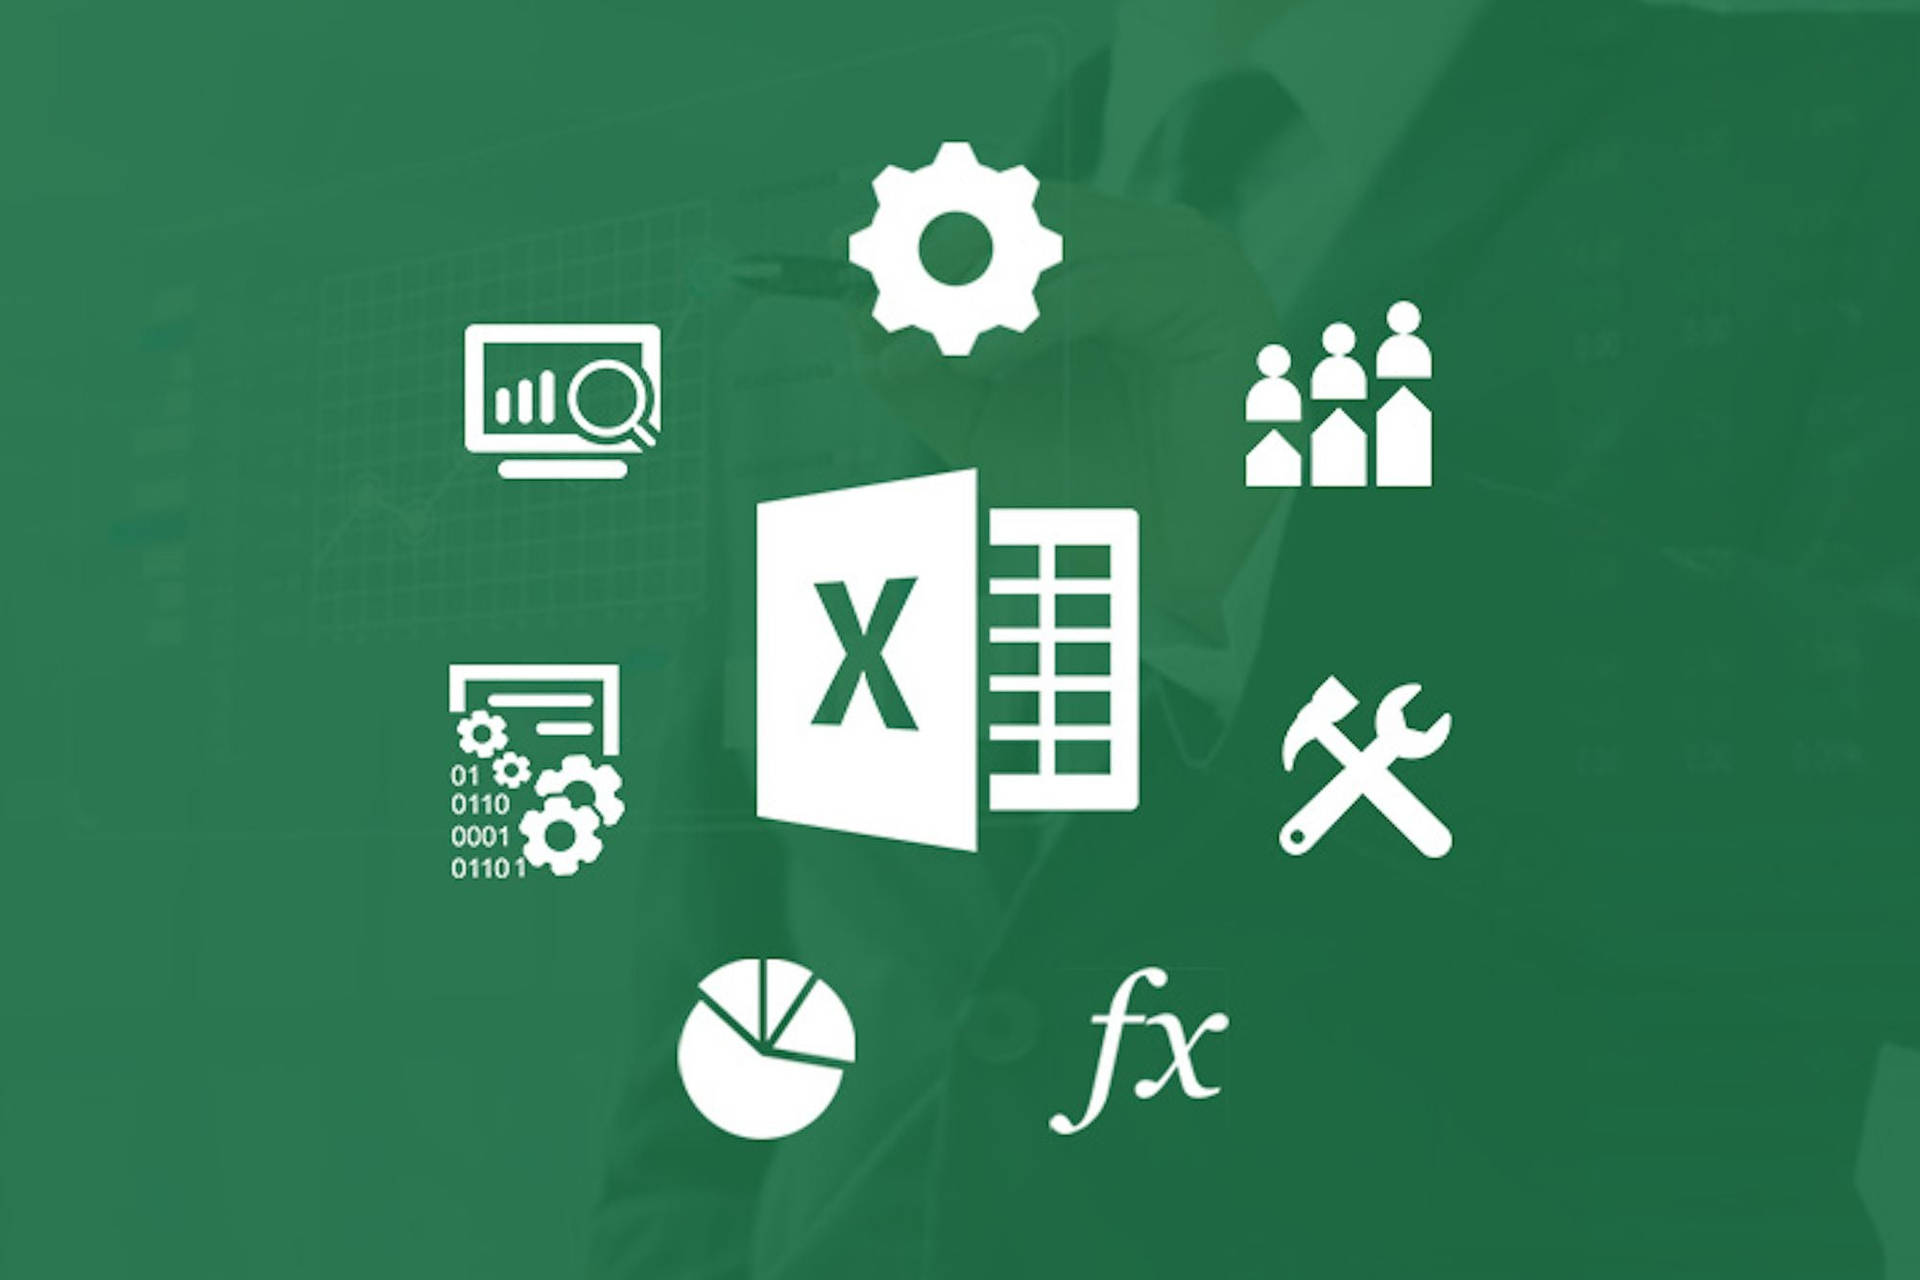 Free Excel Wallpaper Downloads, [100+] Excel Wallpapers for FREE |  